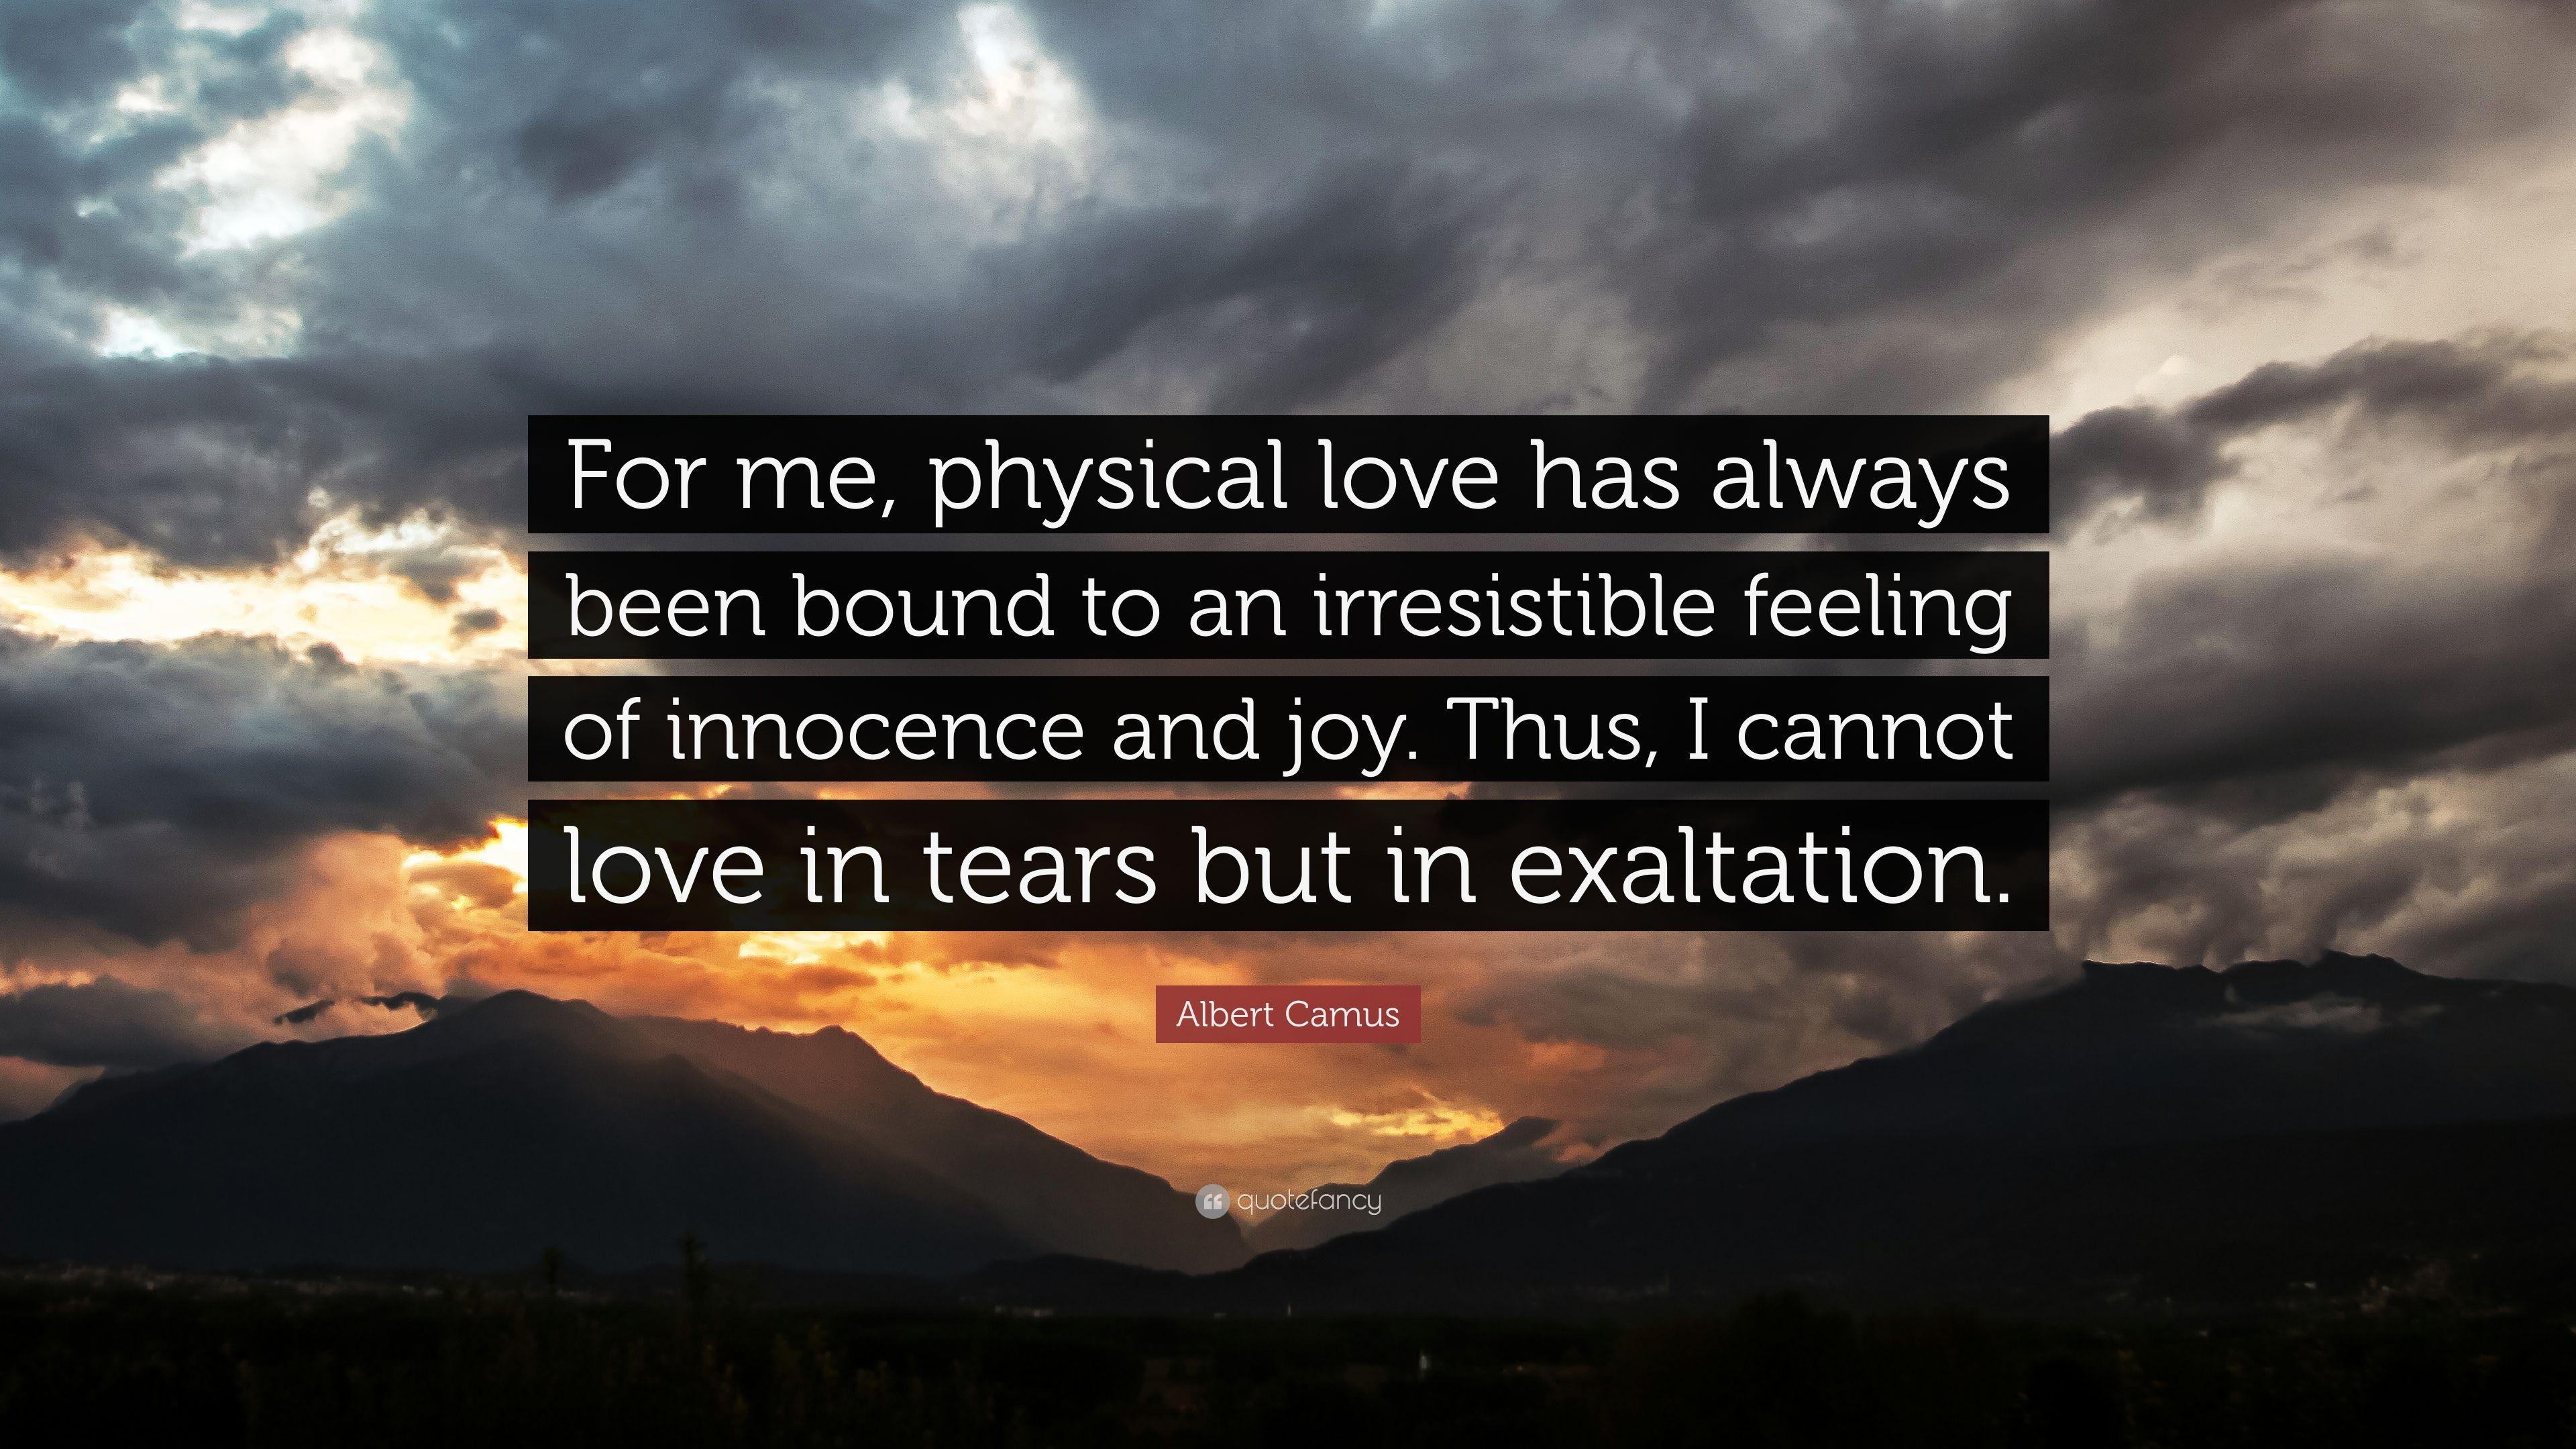 Albert Camus Quote: “For me, physical love has always been bound to